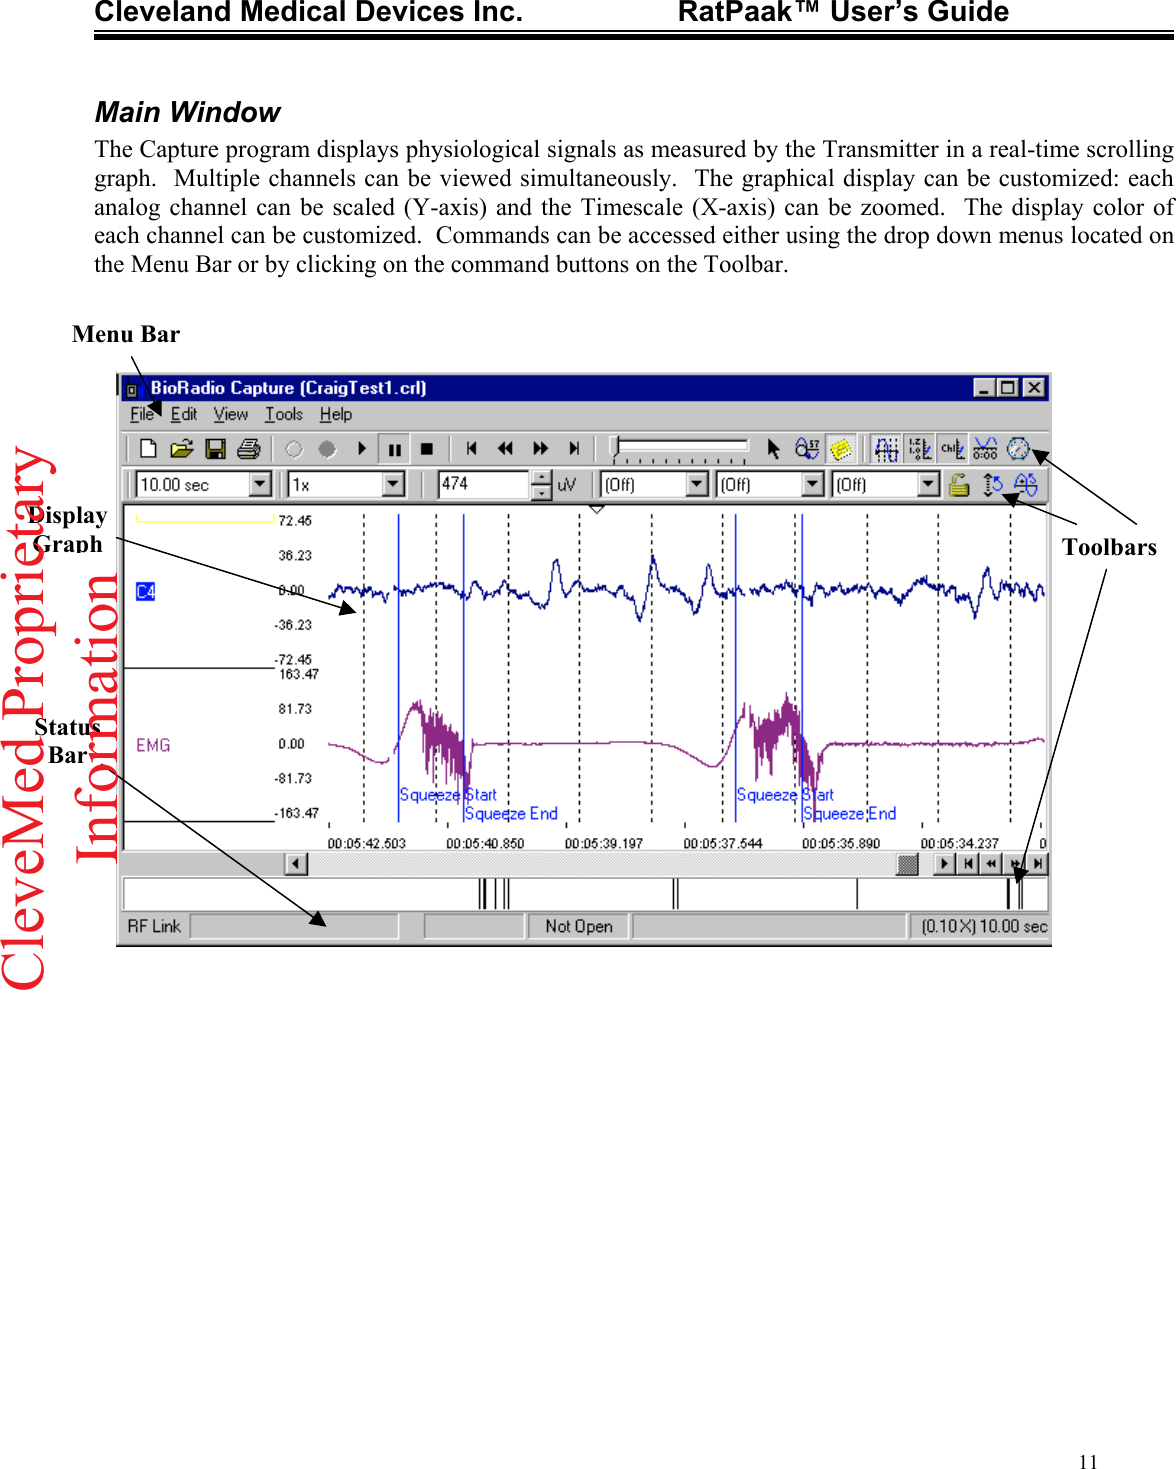 Cleveland Medical Devices Inc.                   RatPaak™ User’s Guide   Main Window The Capture program displays physiological signals as measured by the Transmitter in a real-time scrolling graph.  Multiple channels can be viewed simultaneously.  The graphical display can be customized: each analog channel can be scaled (Y-axis) and the Timescale (X-axis) can be zoomed.  The display color of each channel can be customized.  Commands can be accessed either using the drop down menus located on the Menu Bar or by clicking on the command buttons on the Toolbar.  Status Bar Menu Bar ToolbarsDisplay Graph 11CleveMed ProprietaryInformation